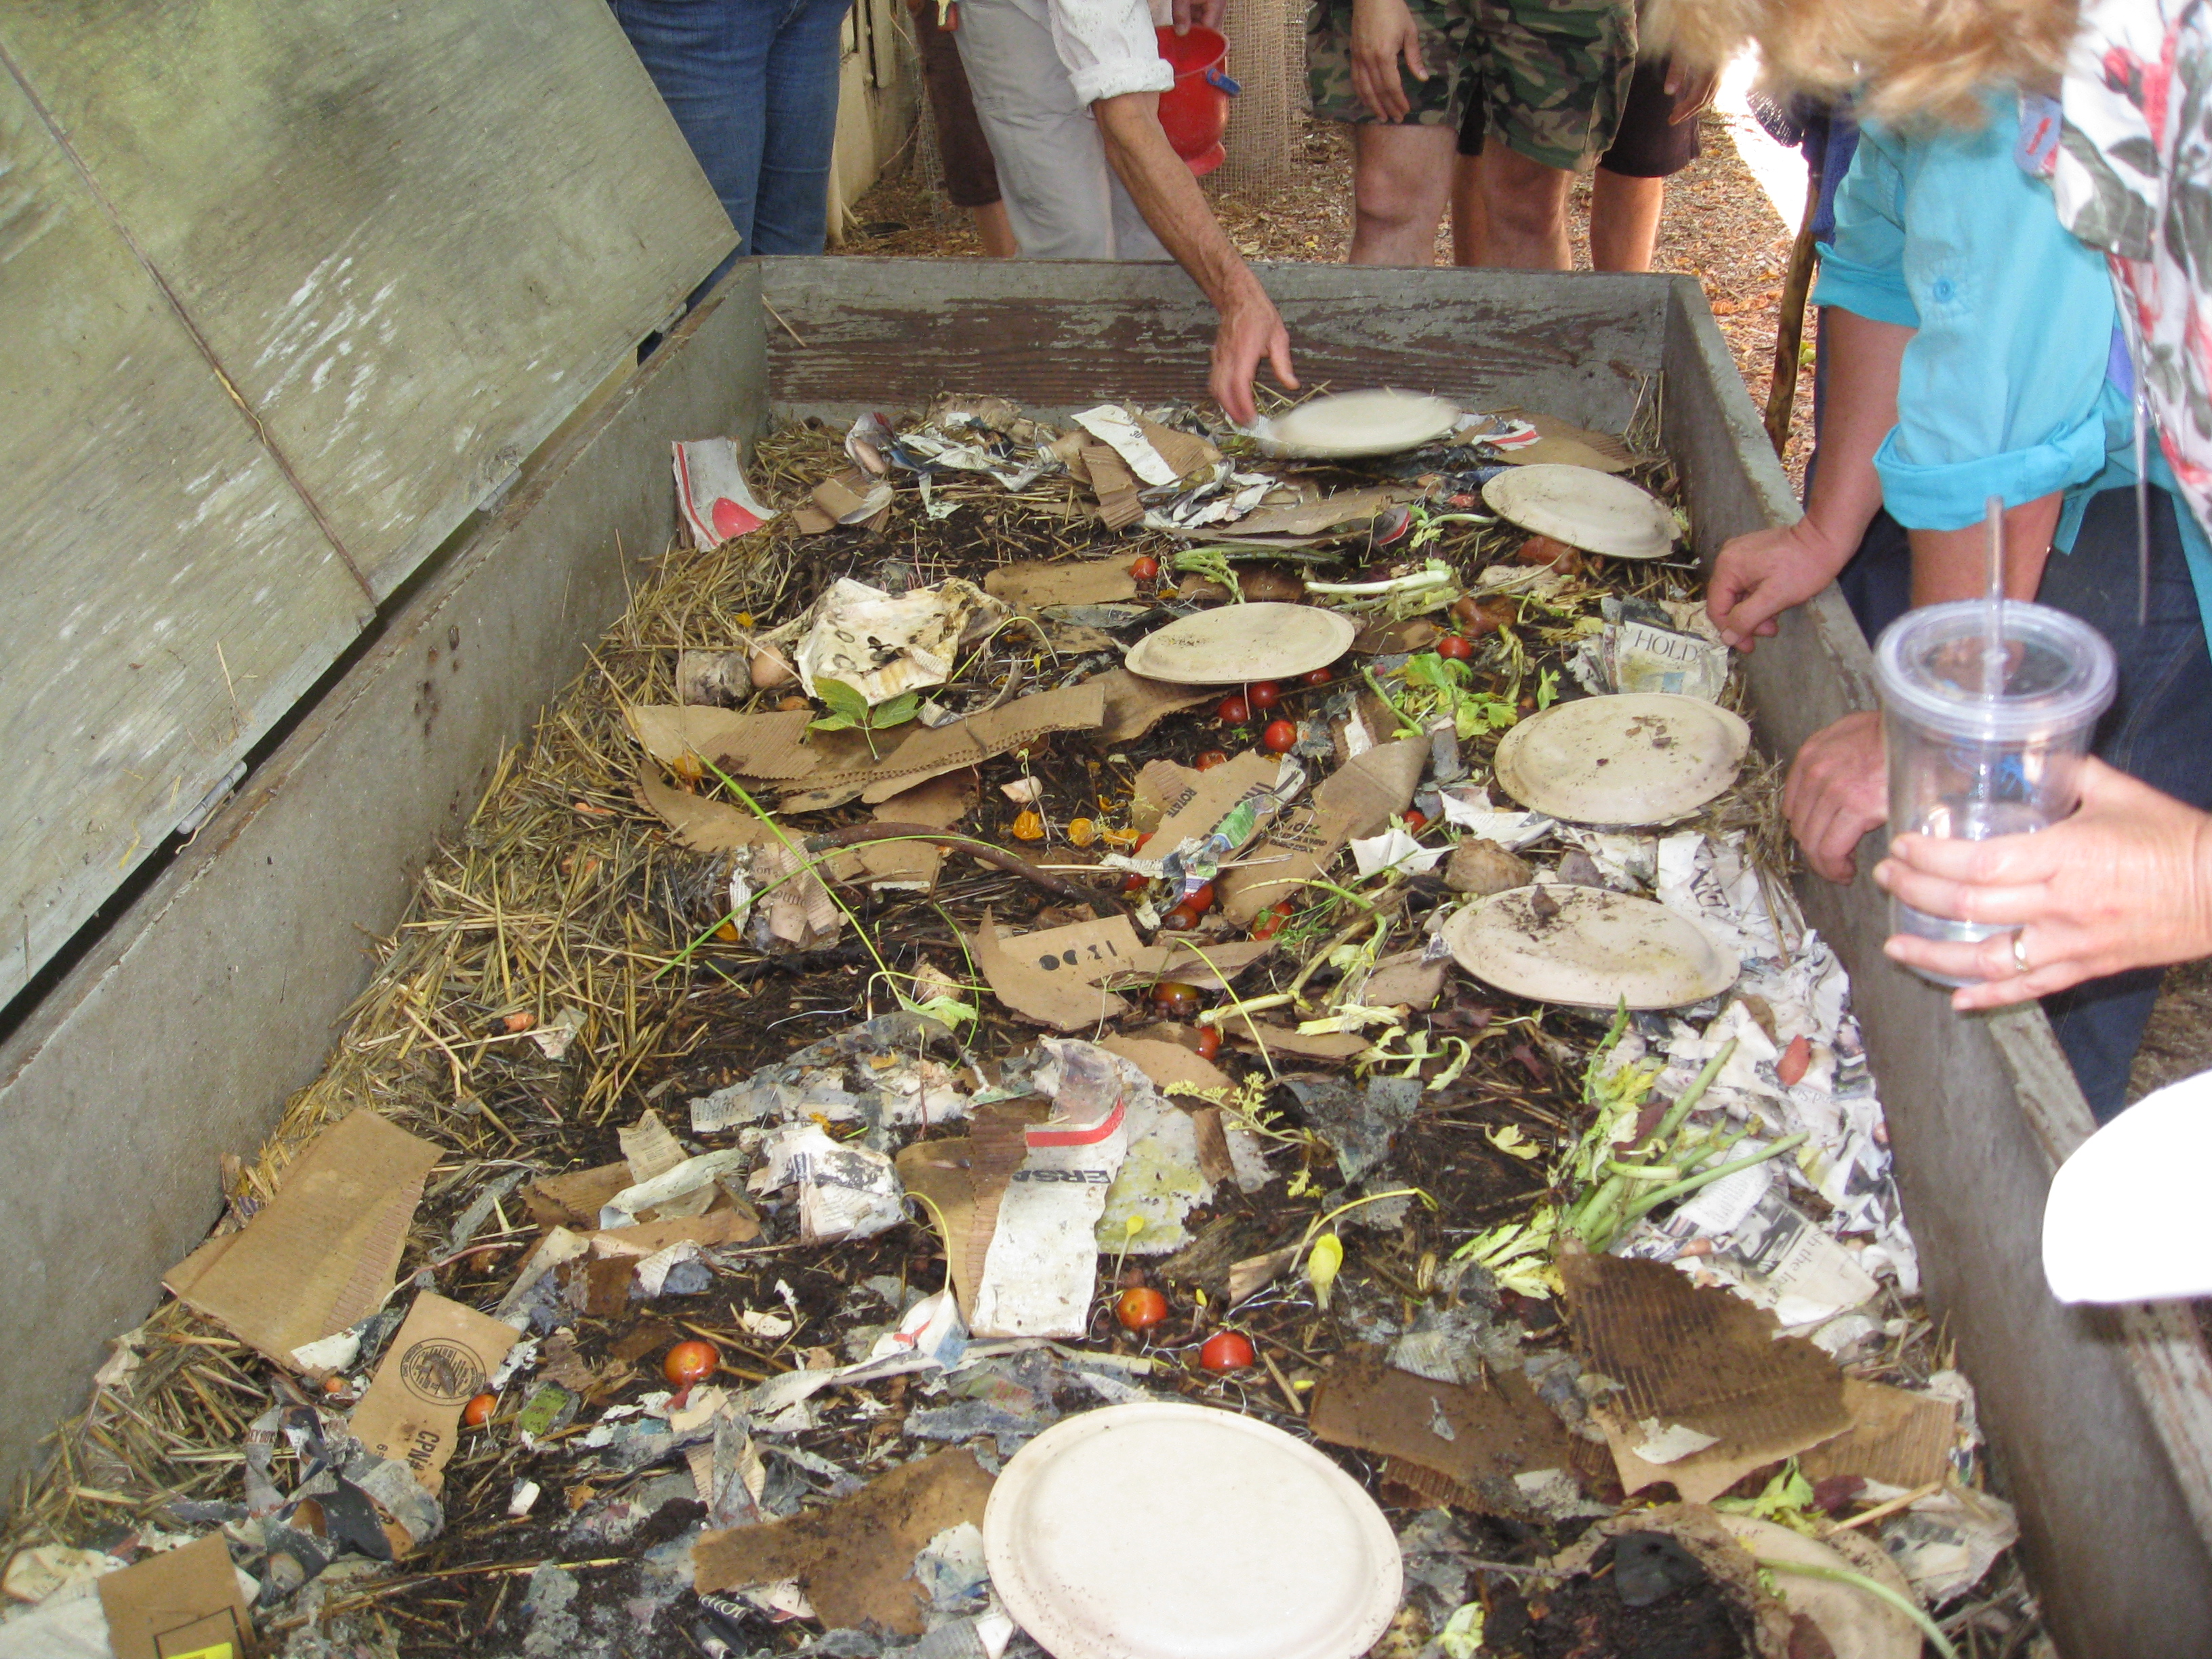 Giant worm bin at the school where class was held.